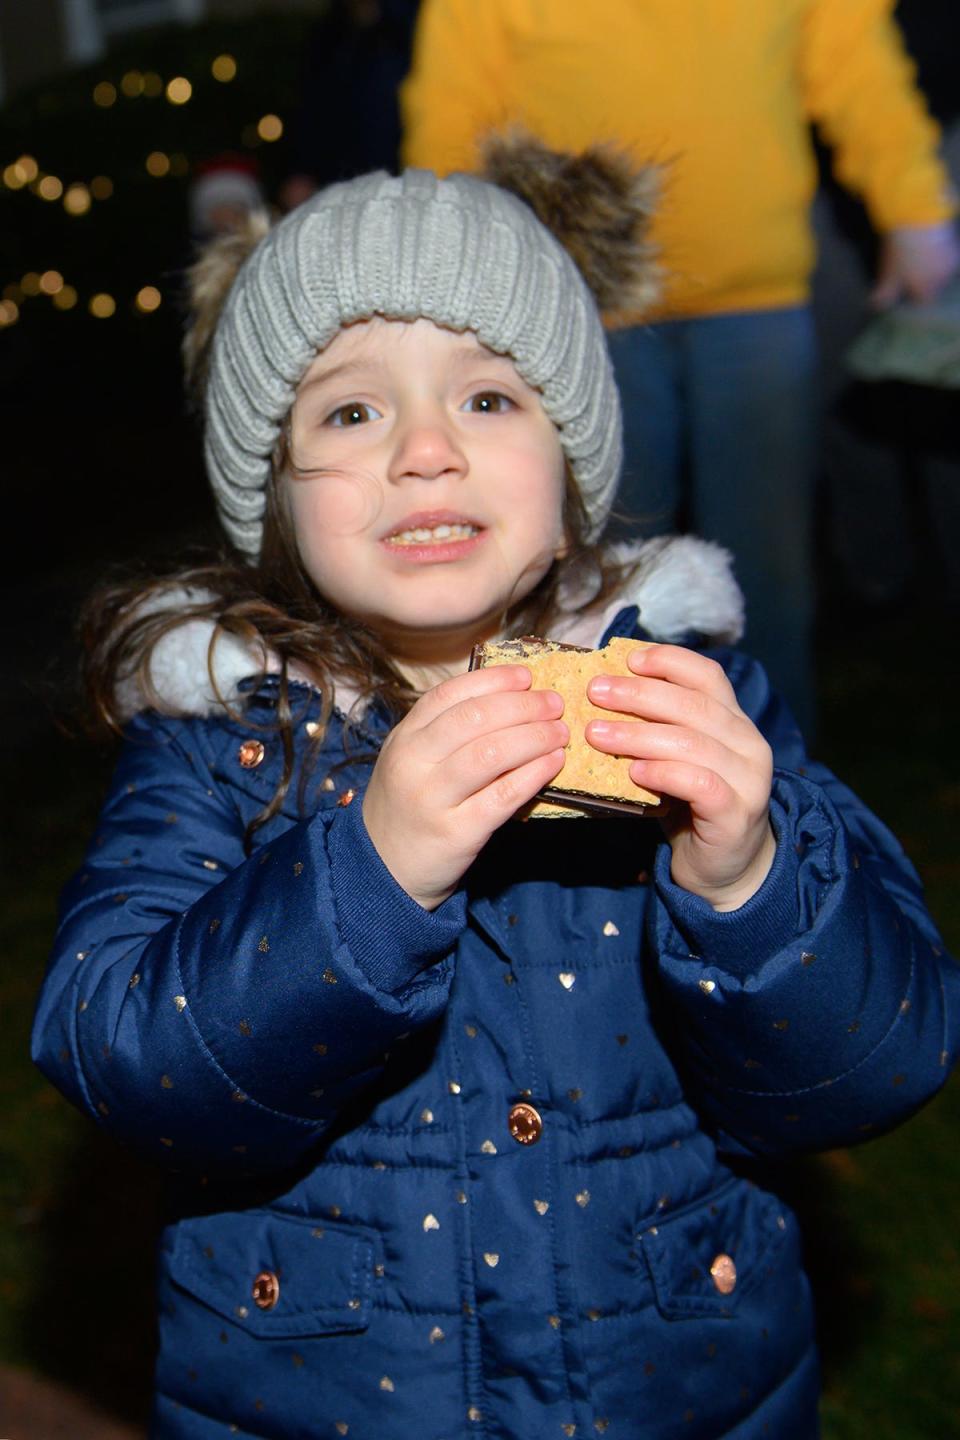 The Lakeville Lions Club held their third annual Christmas tree lighting event on Saturday, Dec. 4 at the club's Main Street headquarters. Three-year-old Adalyn enjoys the s’more she prepared.